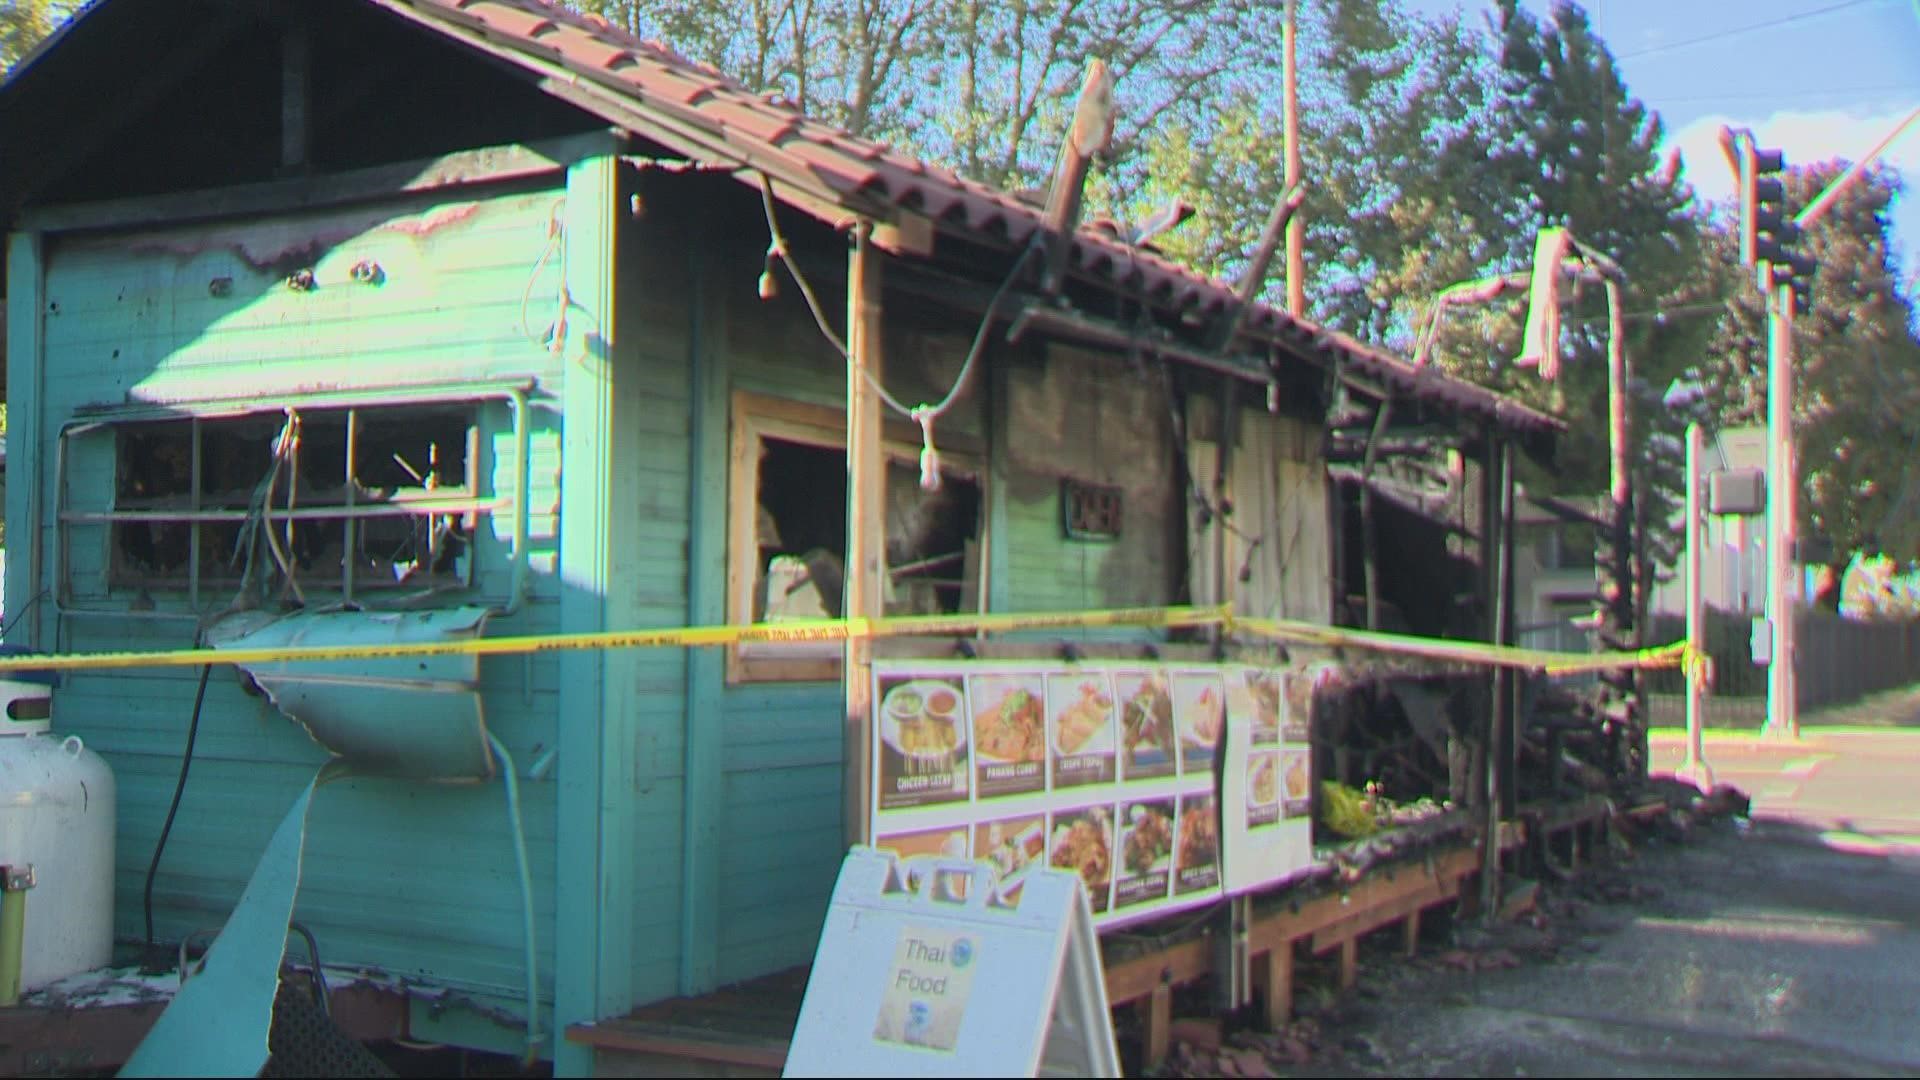 Flames damaged or destroyed several food carts at the corner of North Vancouver and North Fremont on Sunday afternoon.